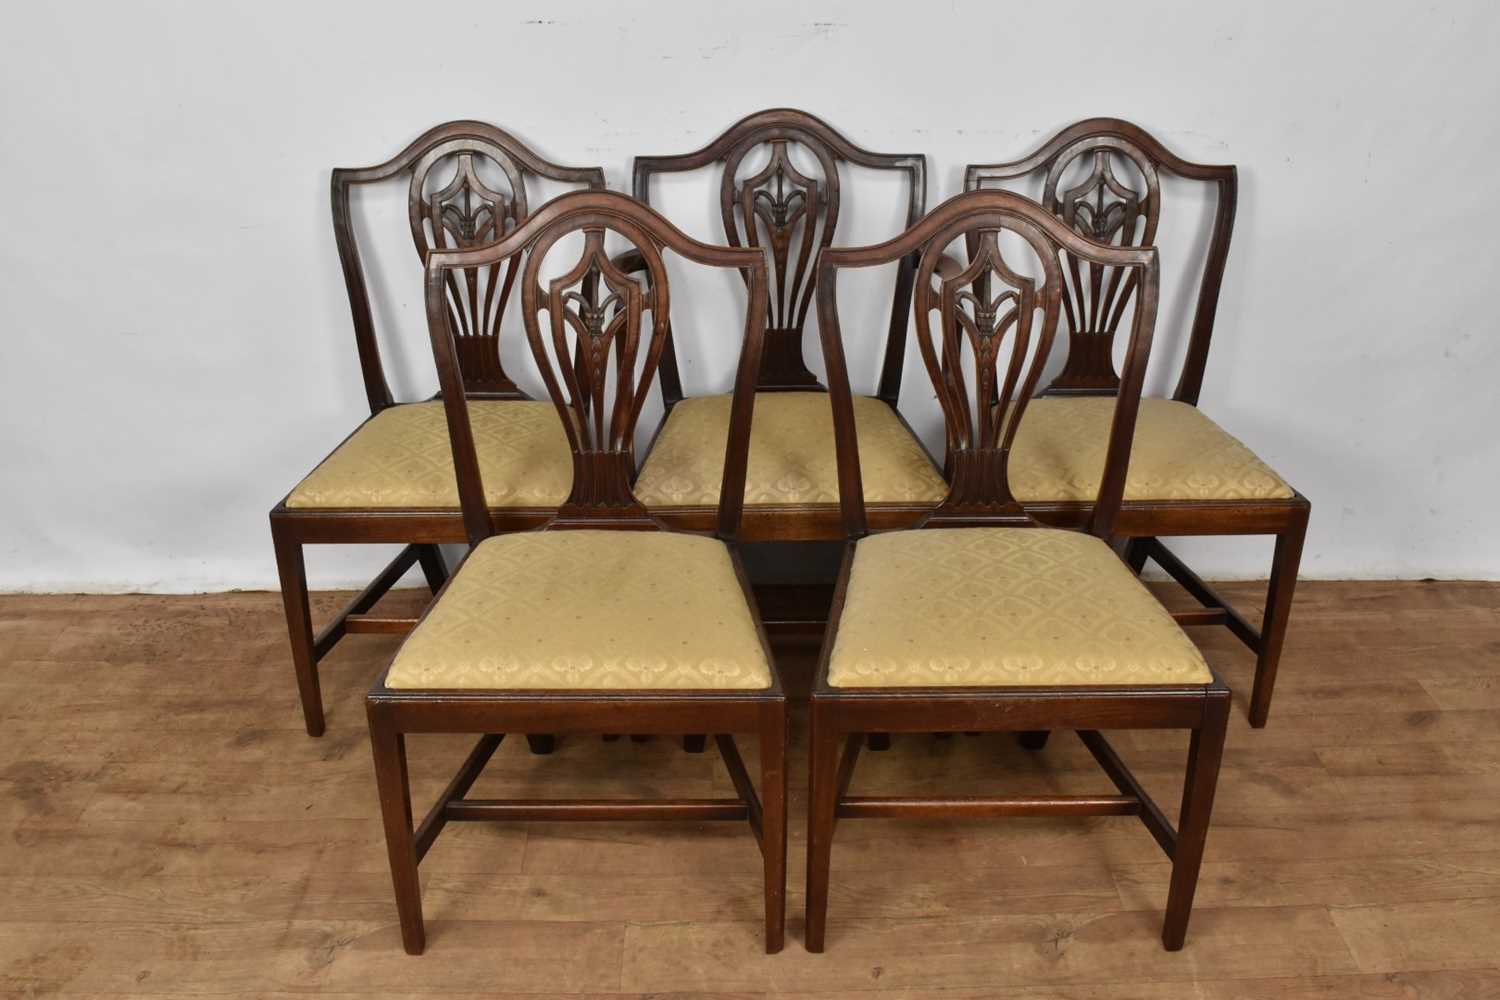 Set of five late 18th century Hepplewhite style mahogany dining chairs